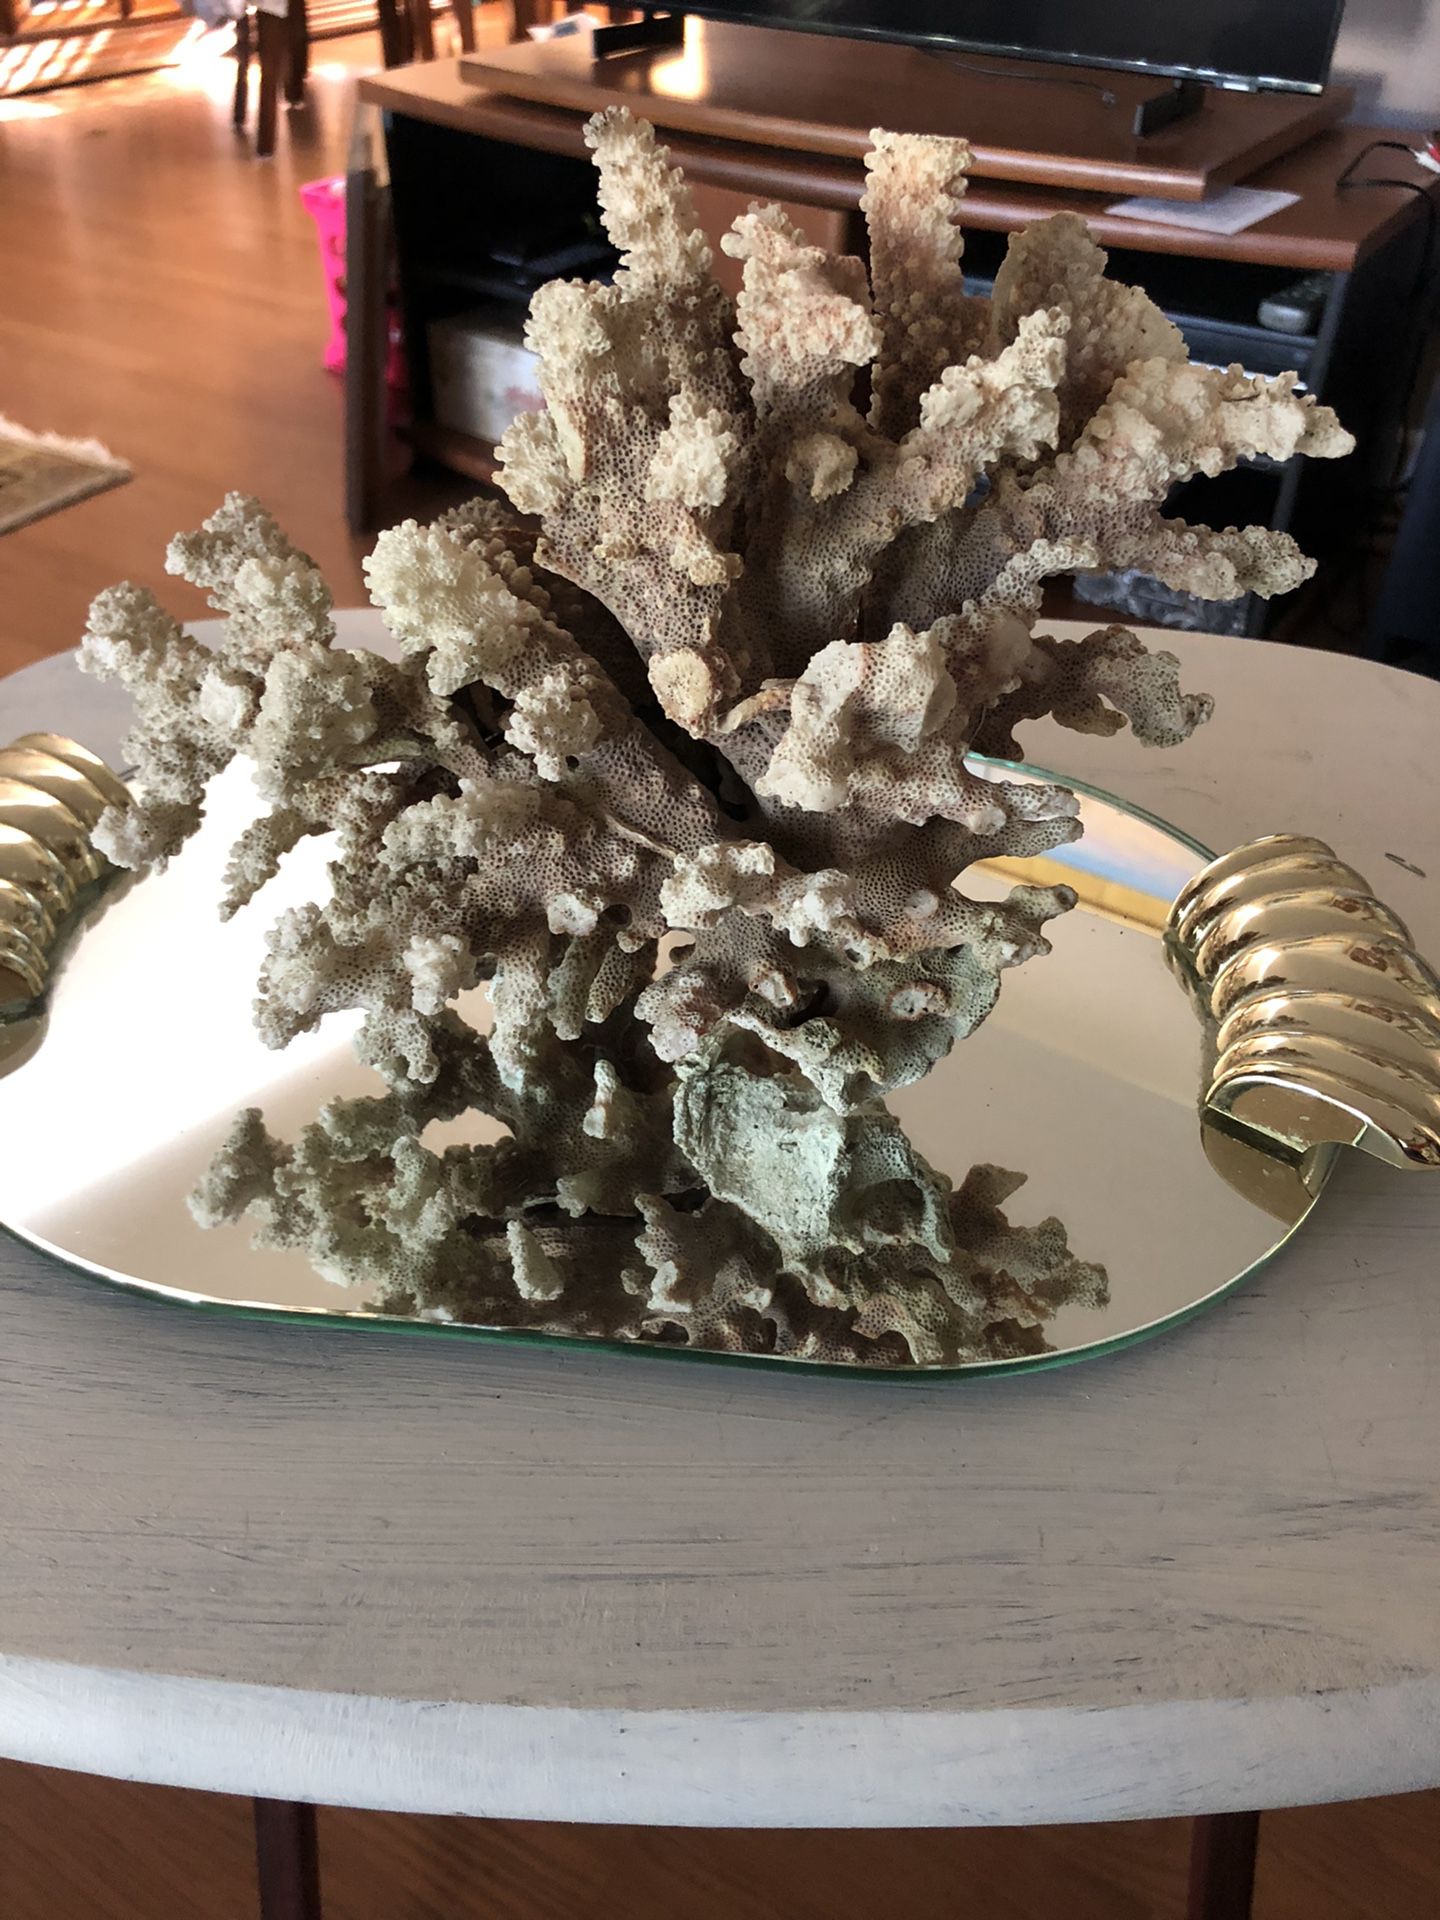 Large Piece Of Coral For Fish Tank Or Display Mirrored Tray Included 2Lbs 12 Oz